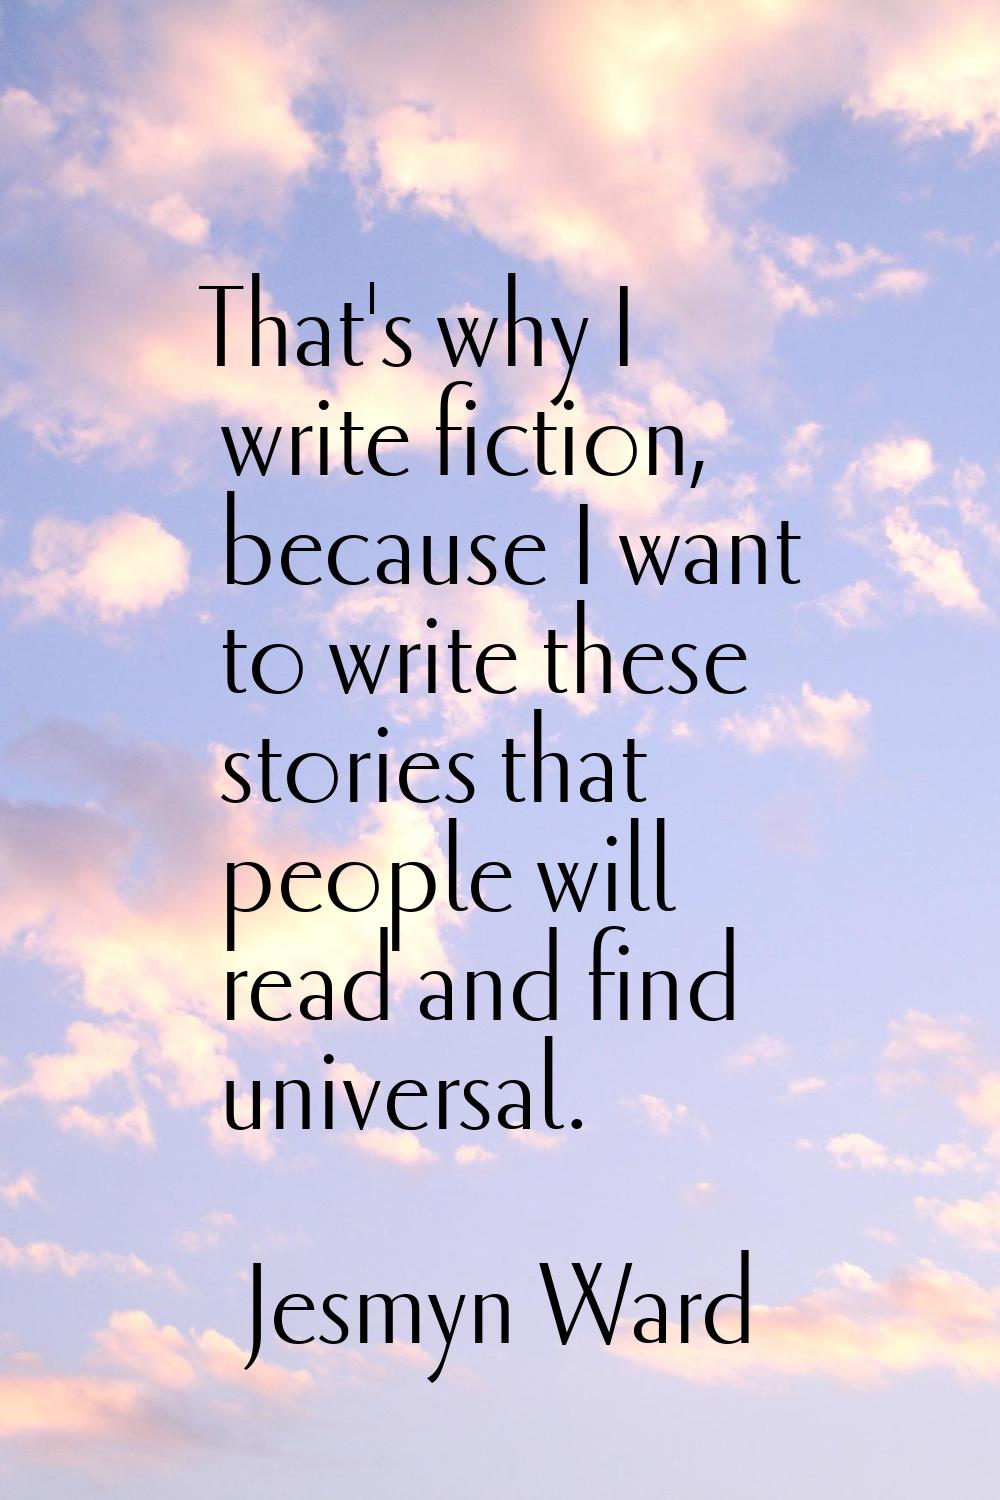 That's why I write fiction, because I want to write these stories that people will read and find un